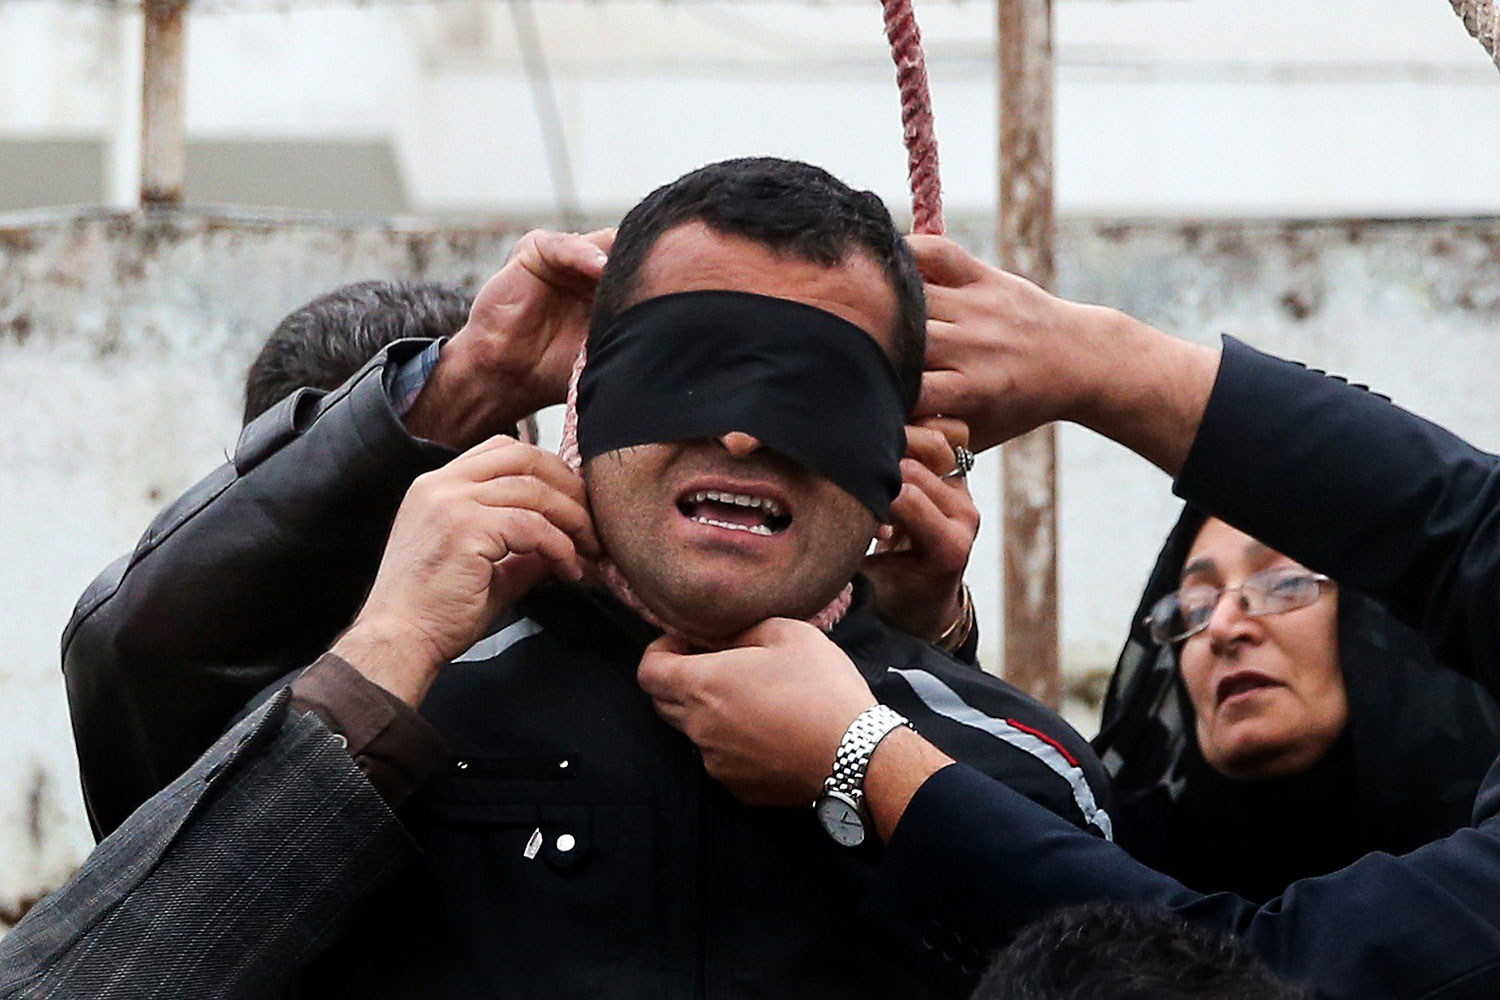 The mother of Abdolah Hosseinzadeh removes the noose with the help of her husband from around the neck of Balal, sparing the life of her son's convicted murderer, April 15, 2014.